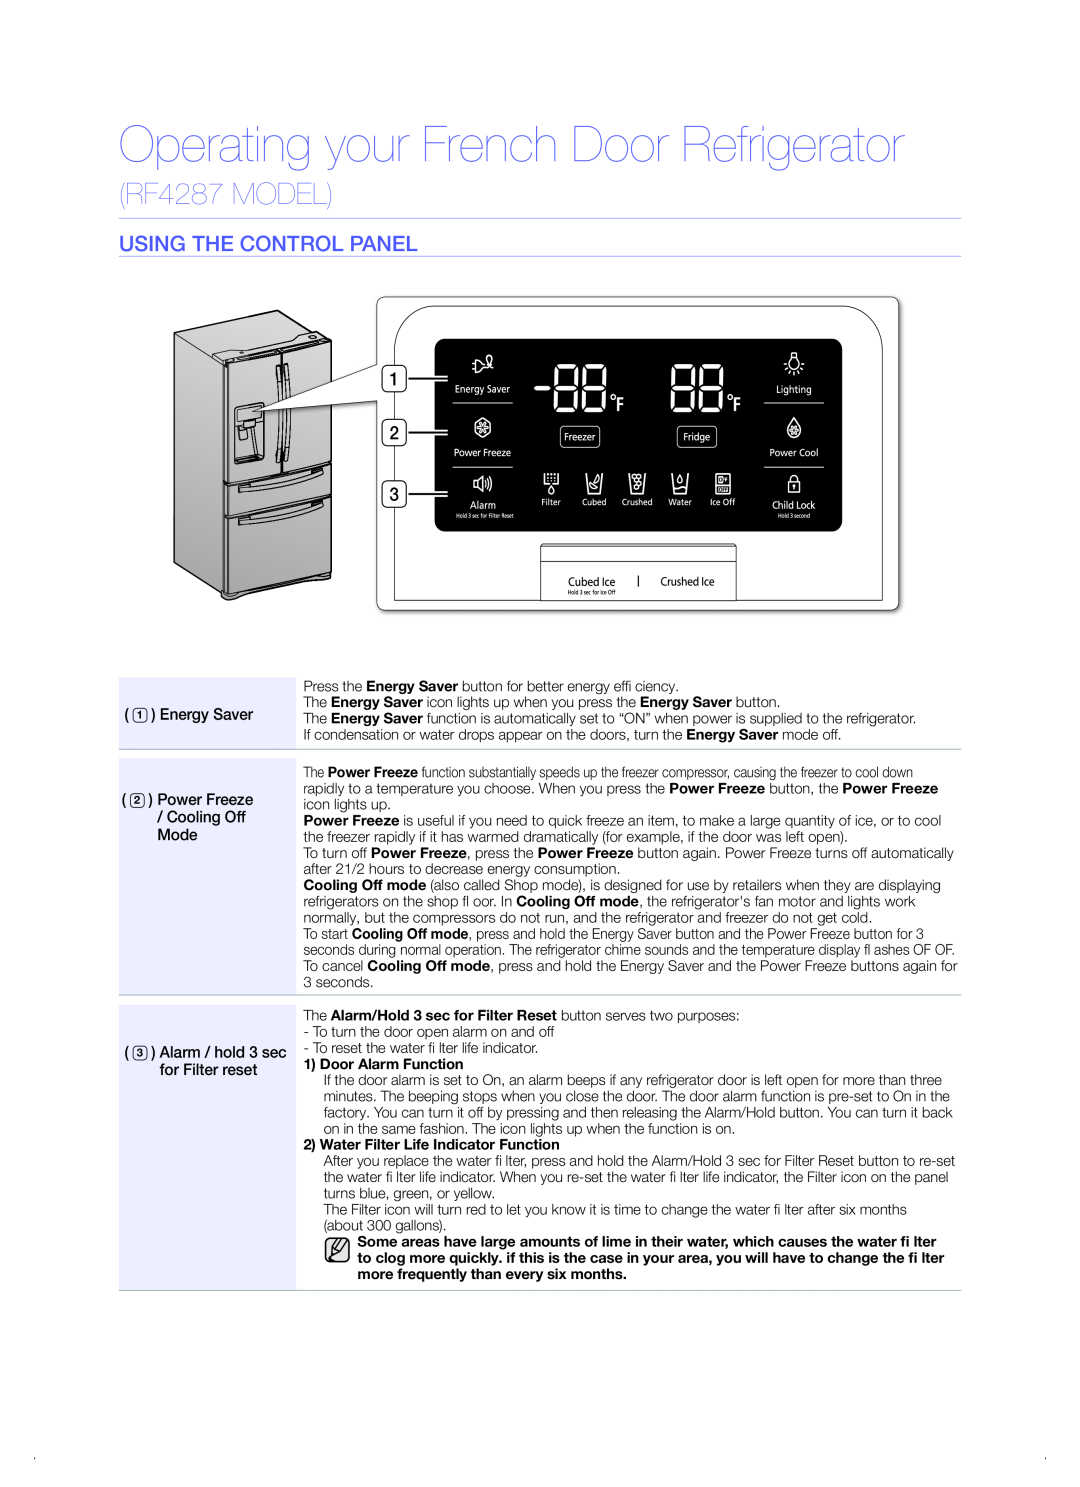 Samsung quick start Operating your French Door Refrigerator, RF4287 MODEL, Using The Control Panel 